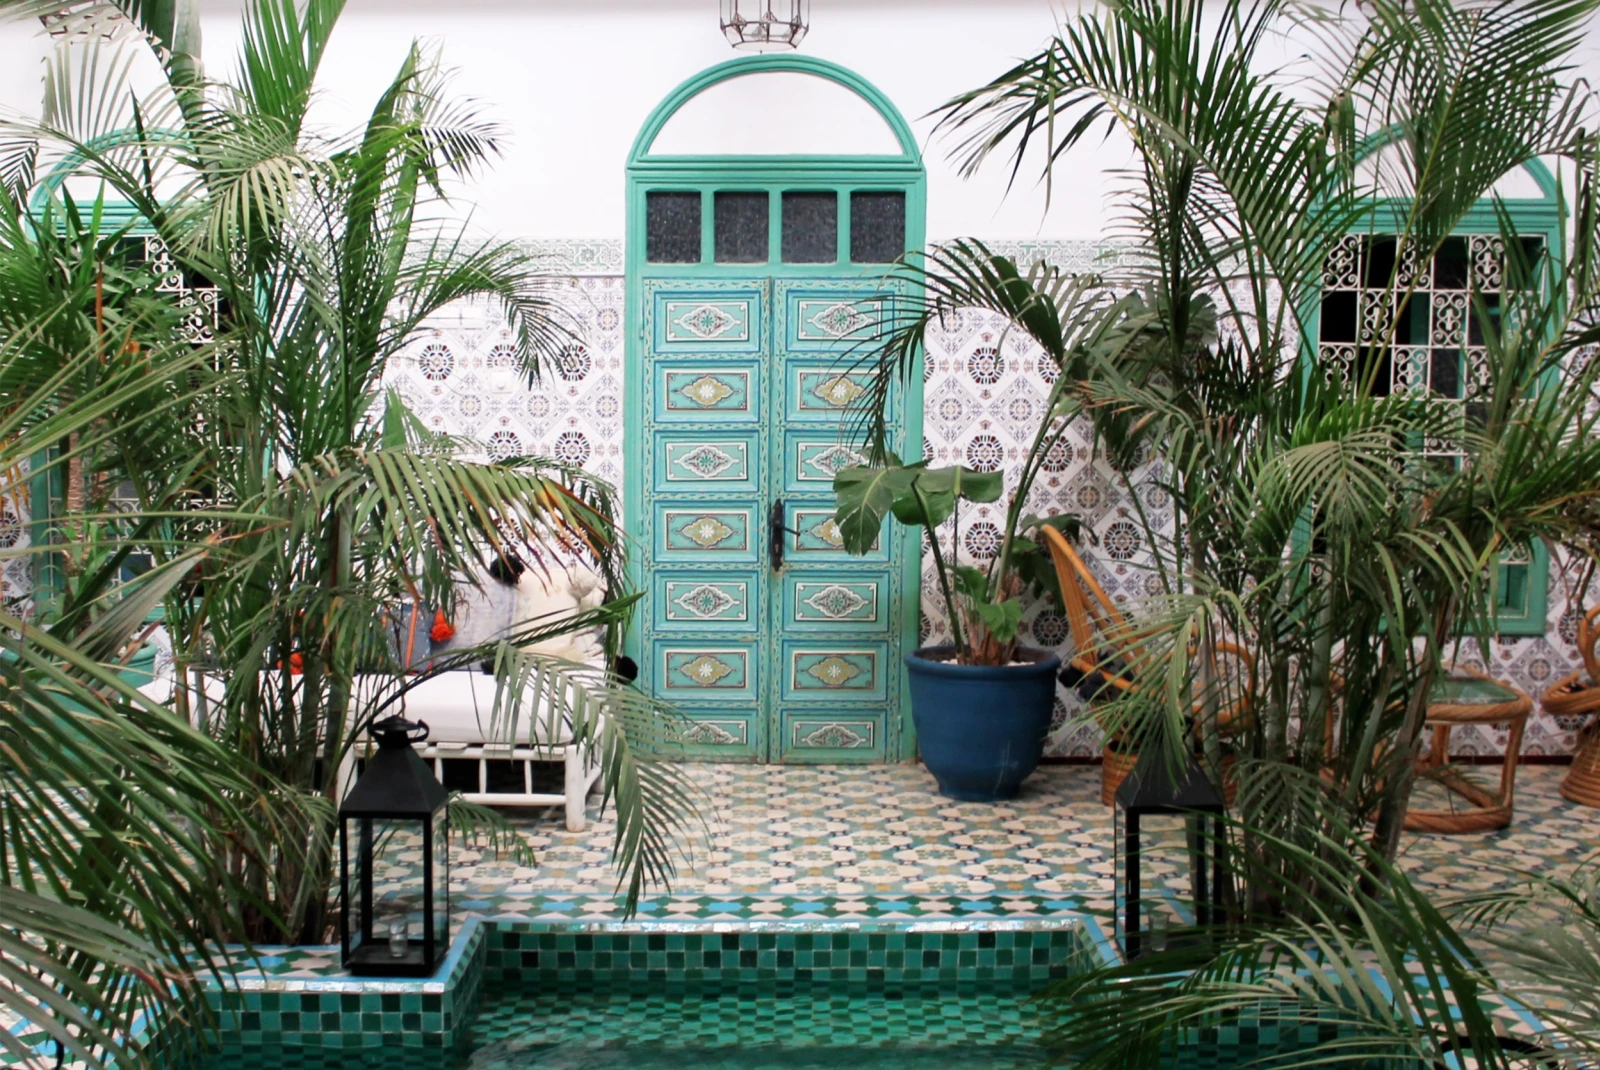 Tall green plants with blue tiled stairs and blue door with white wall